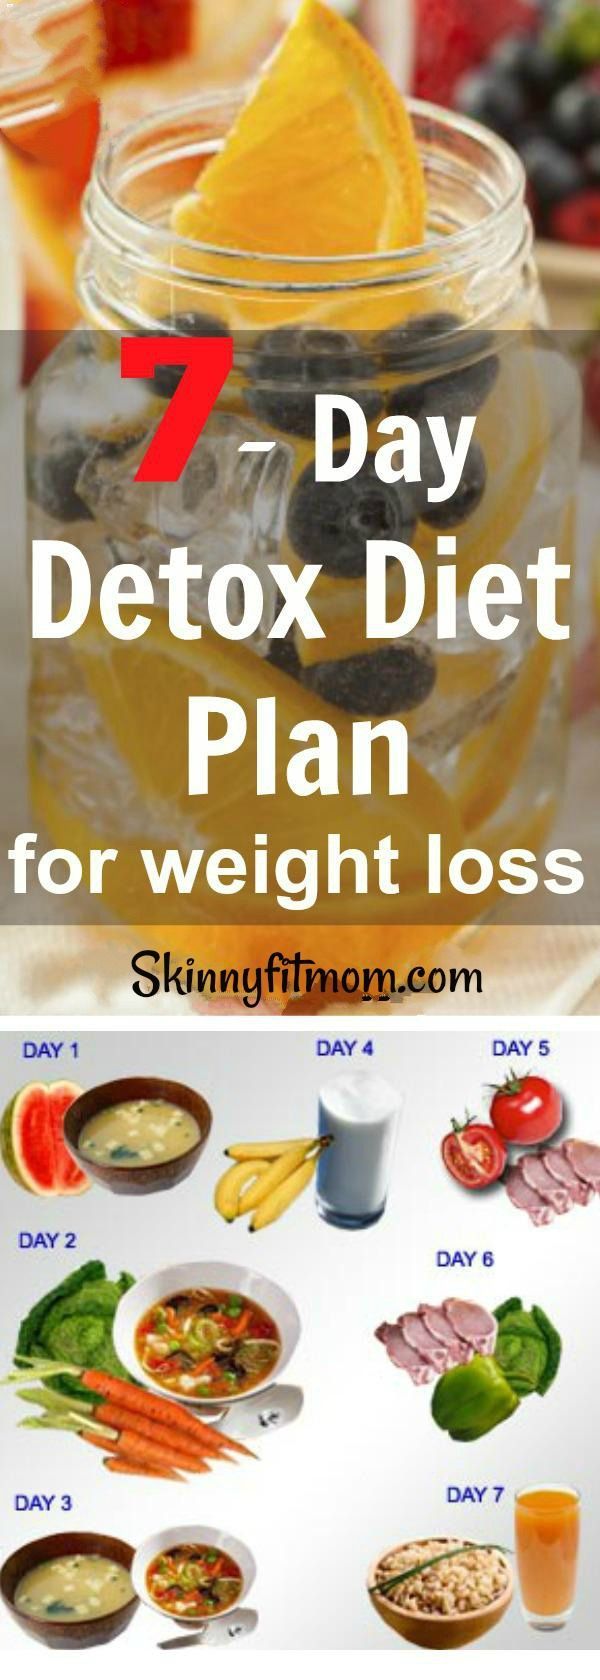 Top 9 Detox Smoothie Recipes for Quick Weight Loss -   24 cleanse diet recipes
 ideas